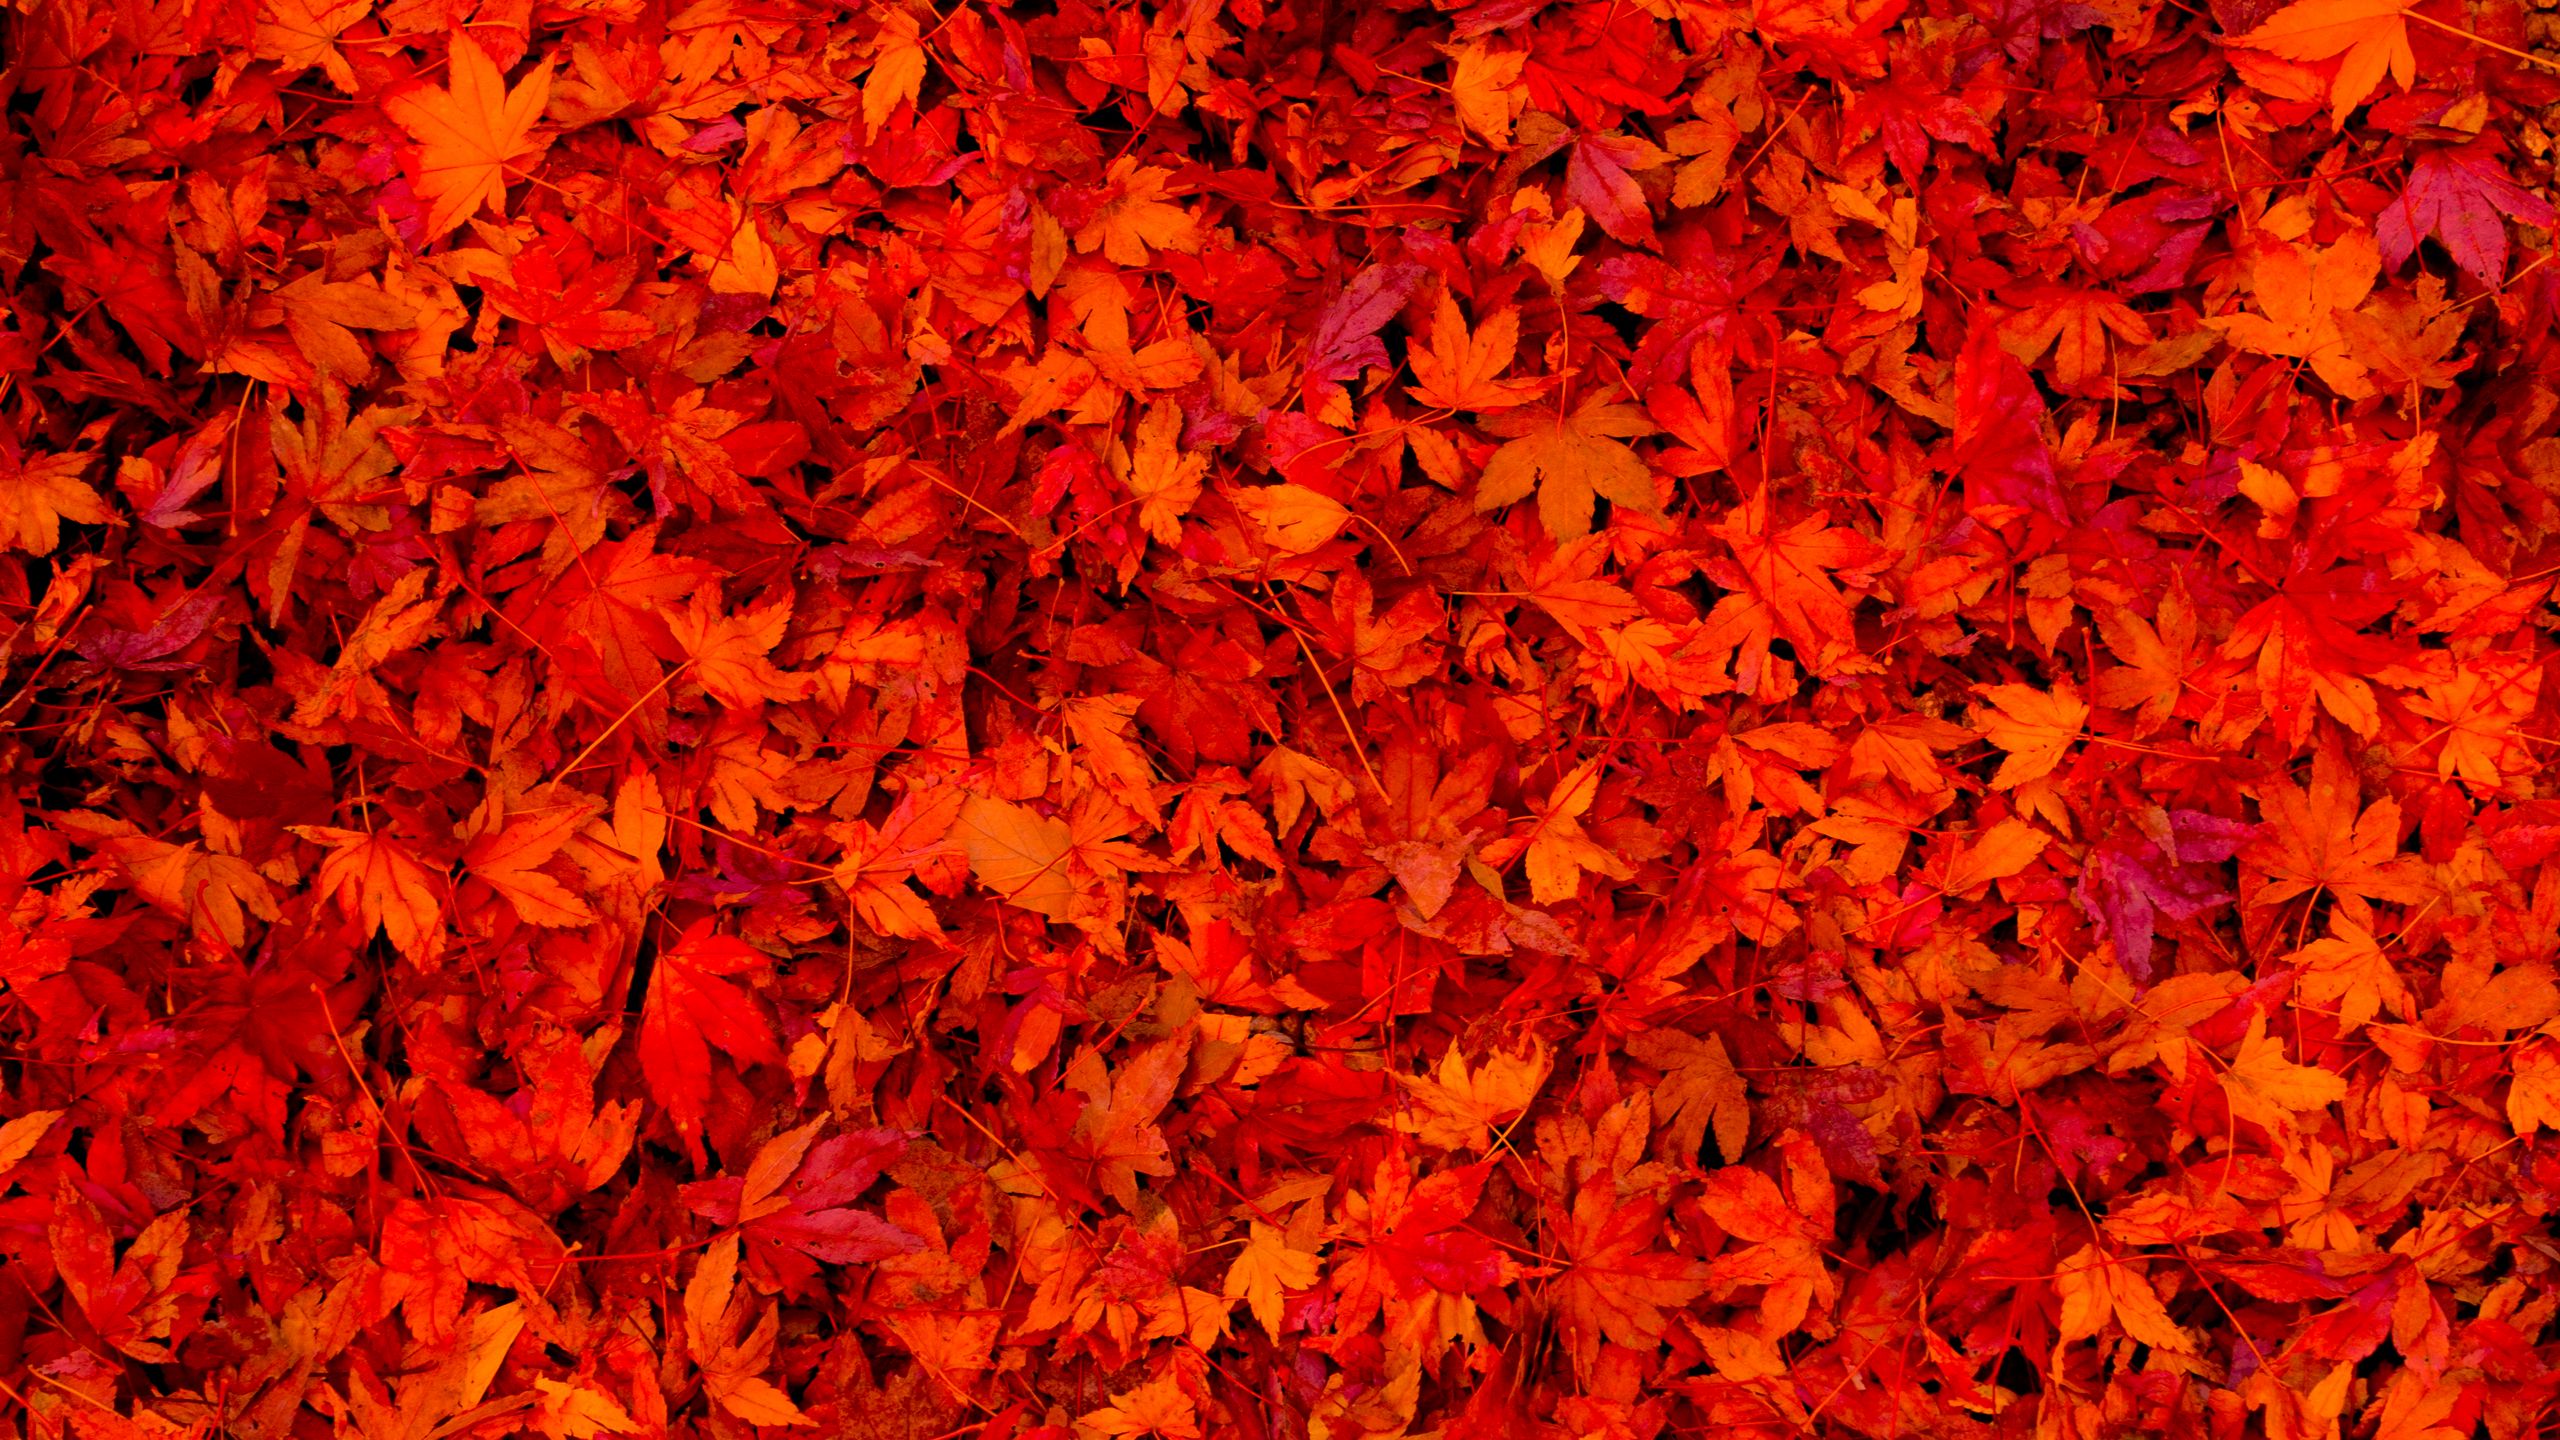 Download Wallpaper 2560x1440 Fallen Leaves Leaves Red Bright